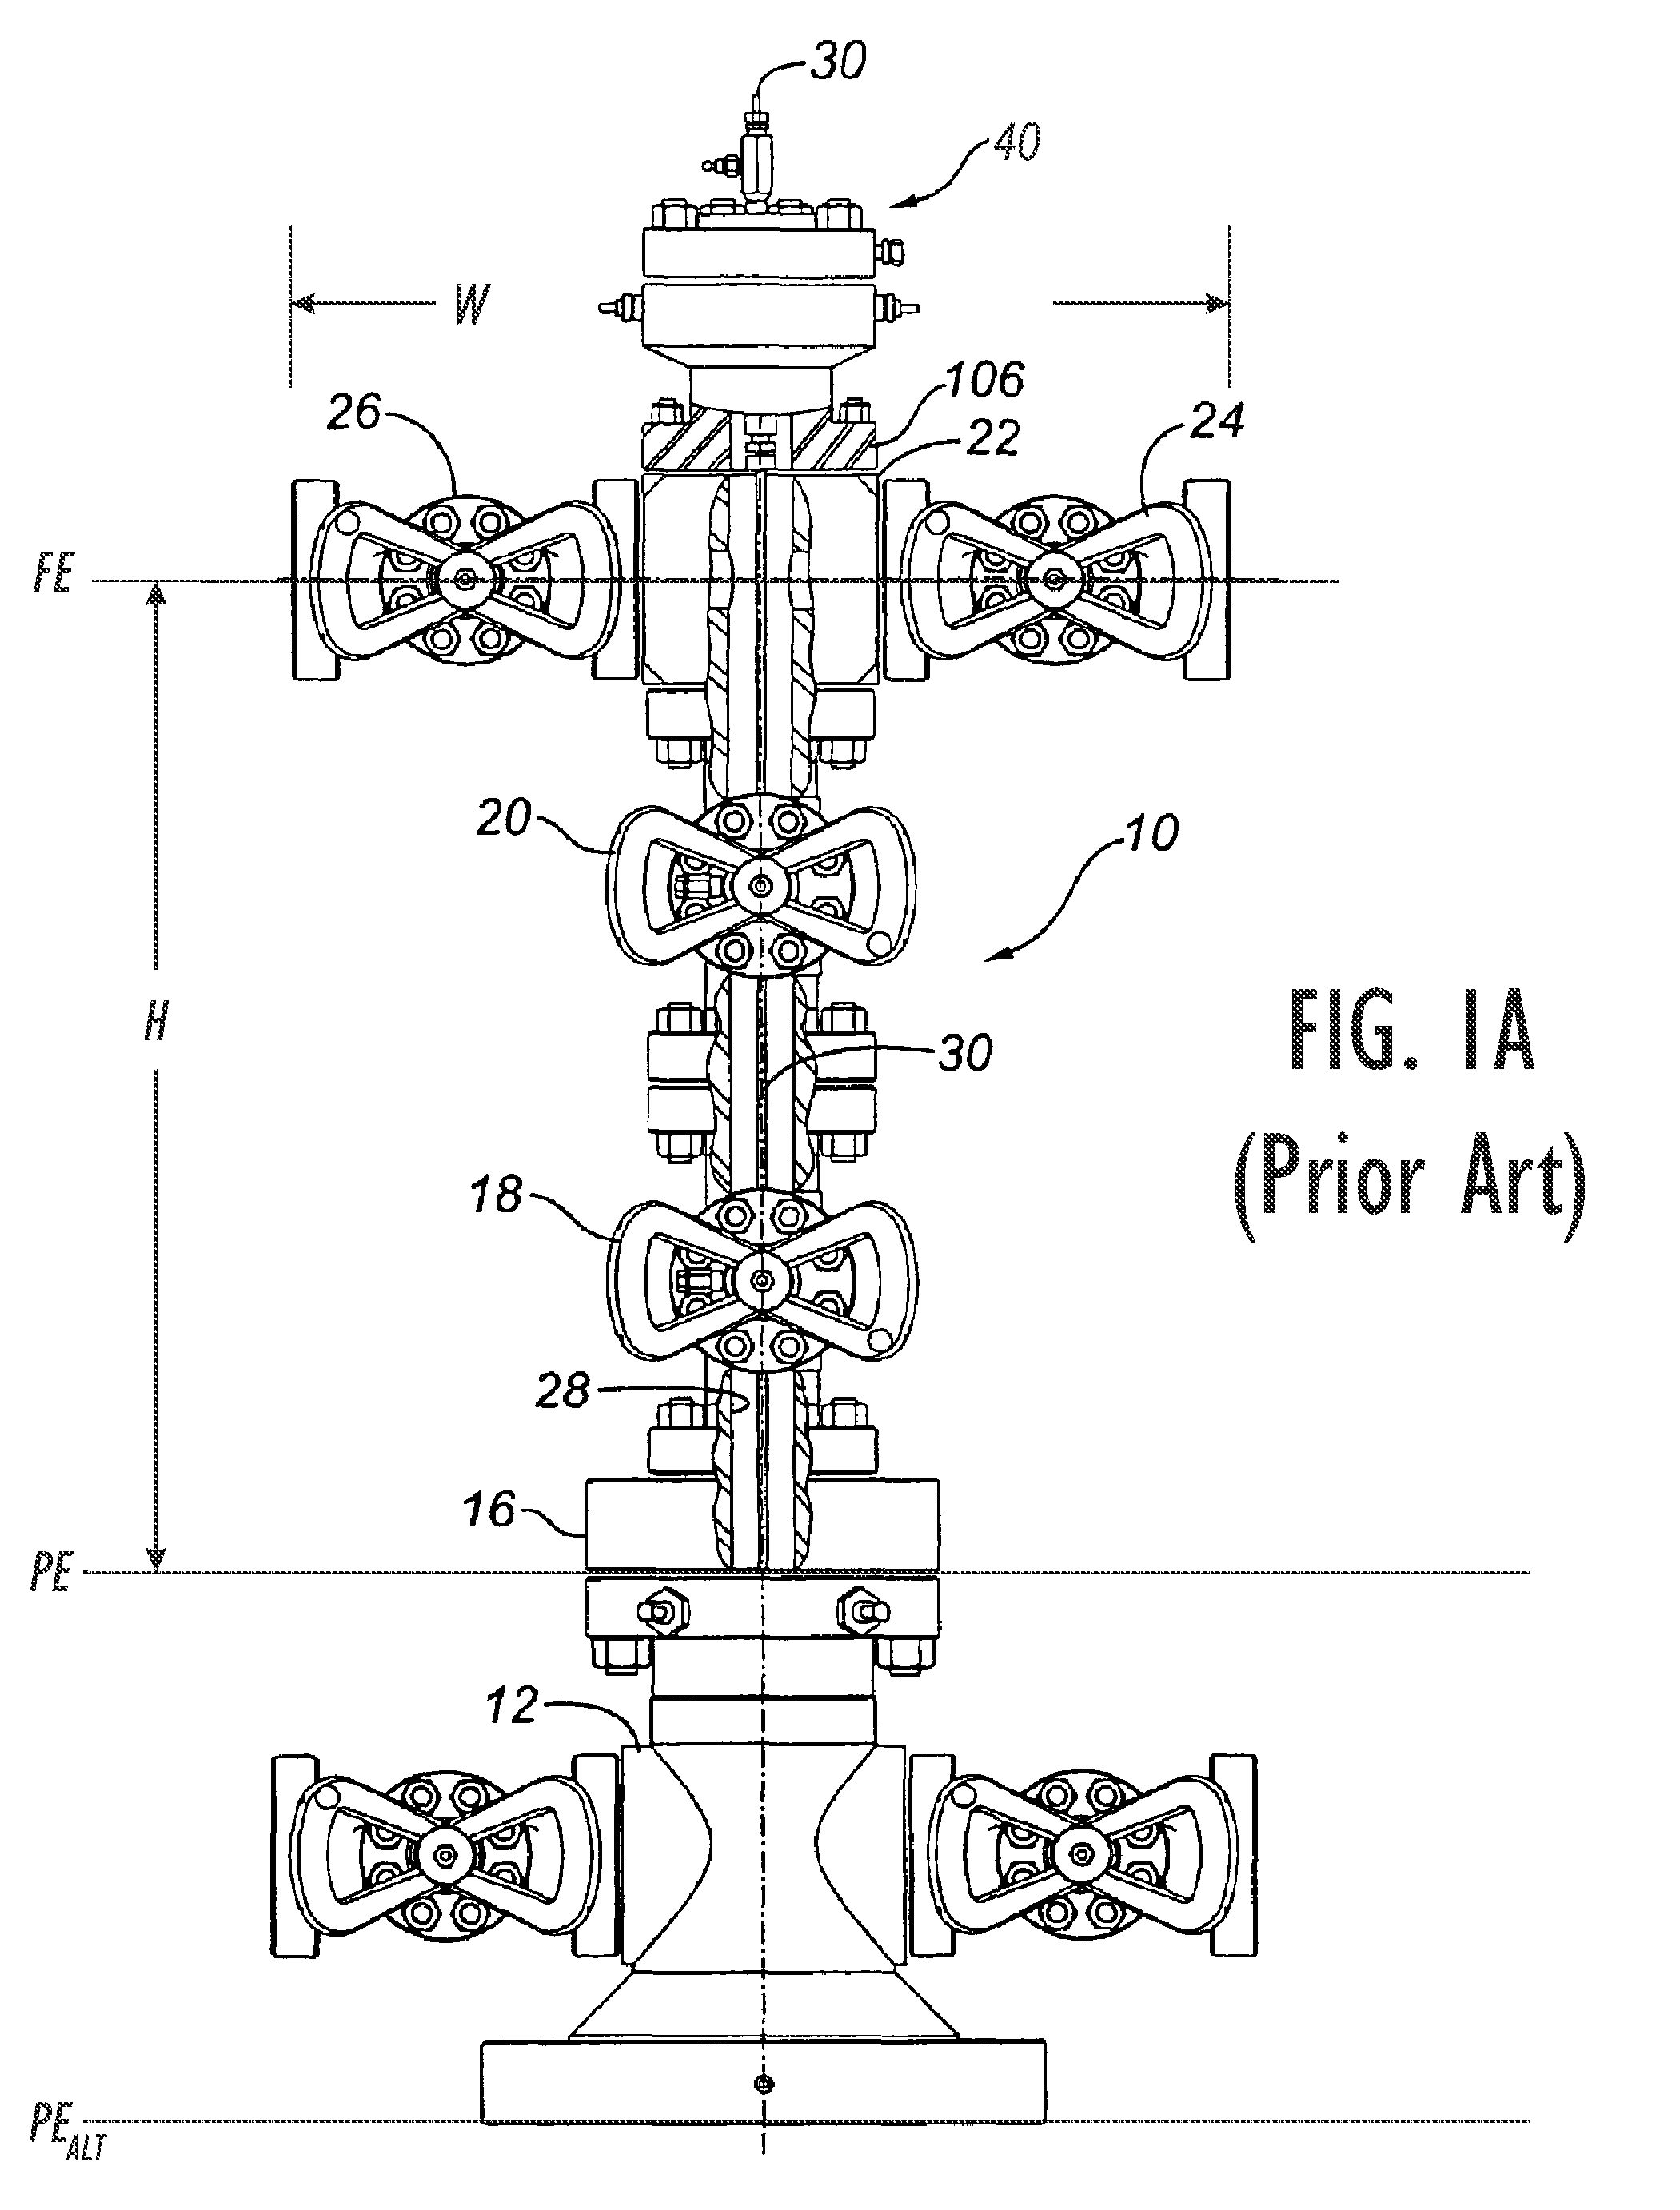 Modified Christmas tree components and associated methods for using coiled tubing in a well